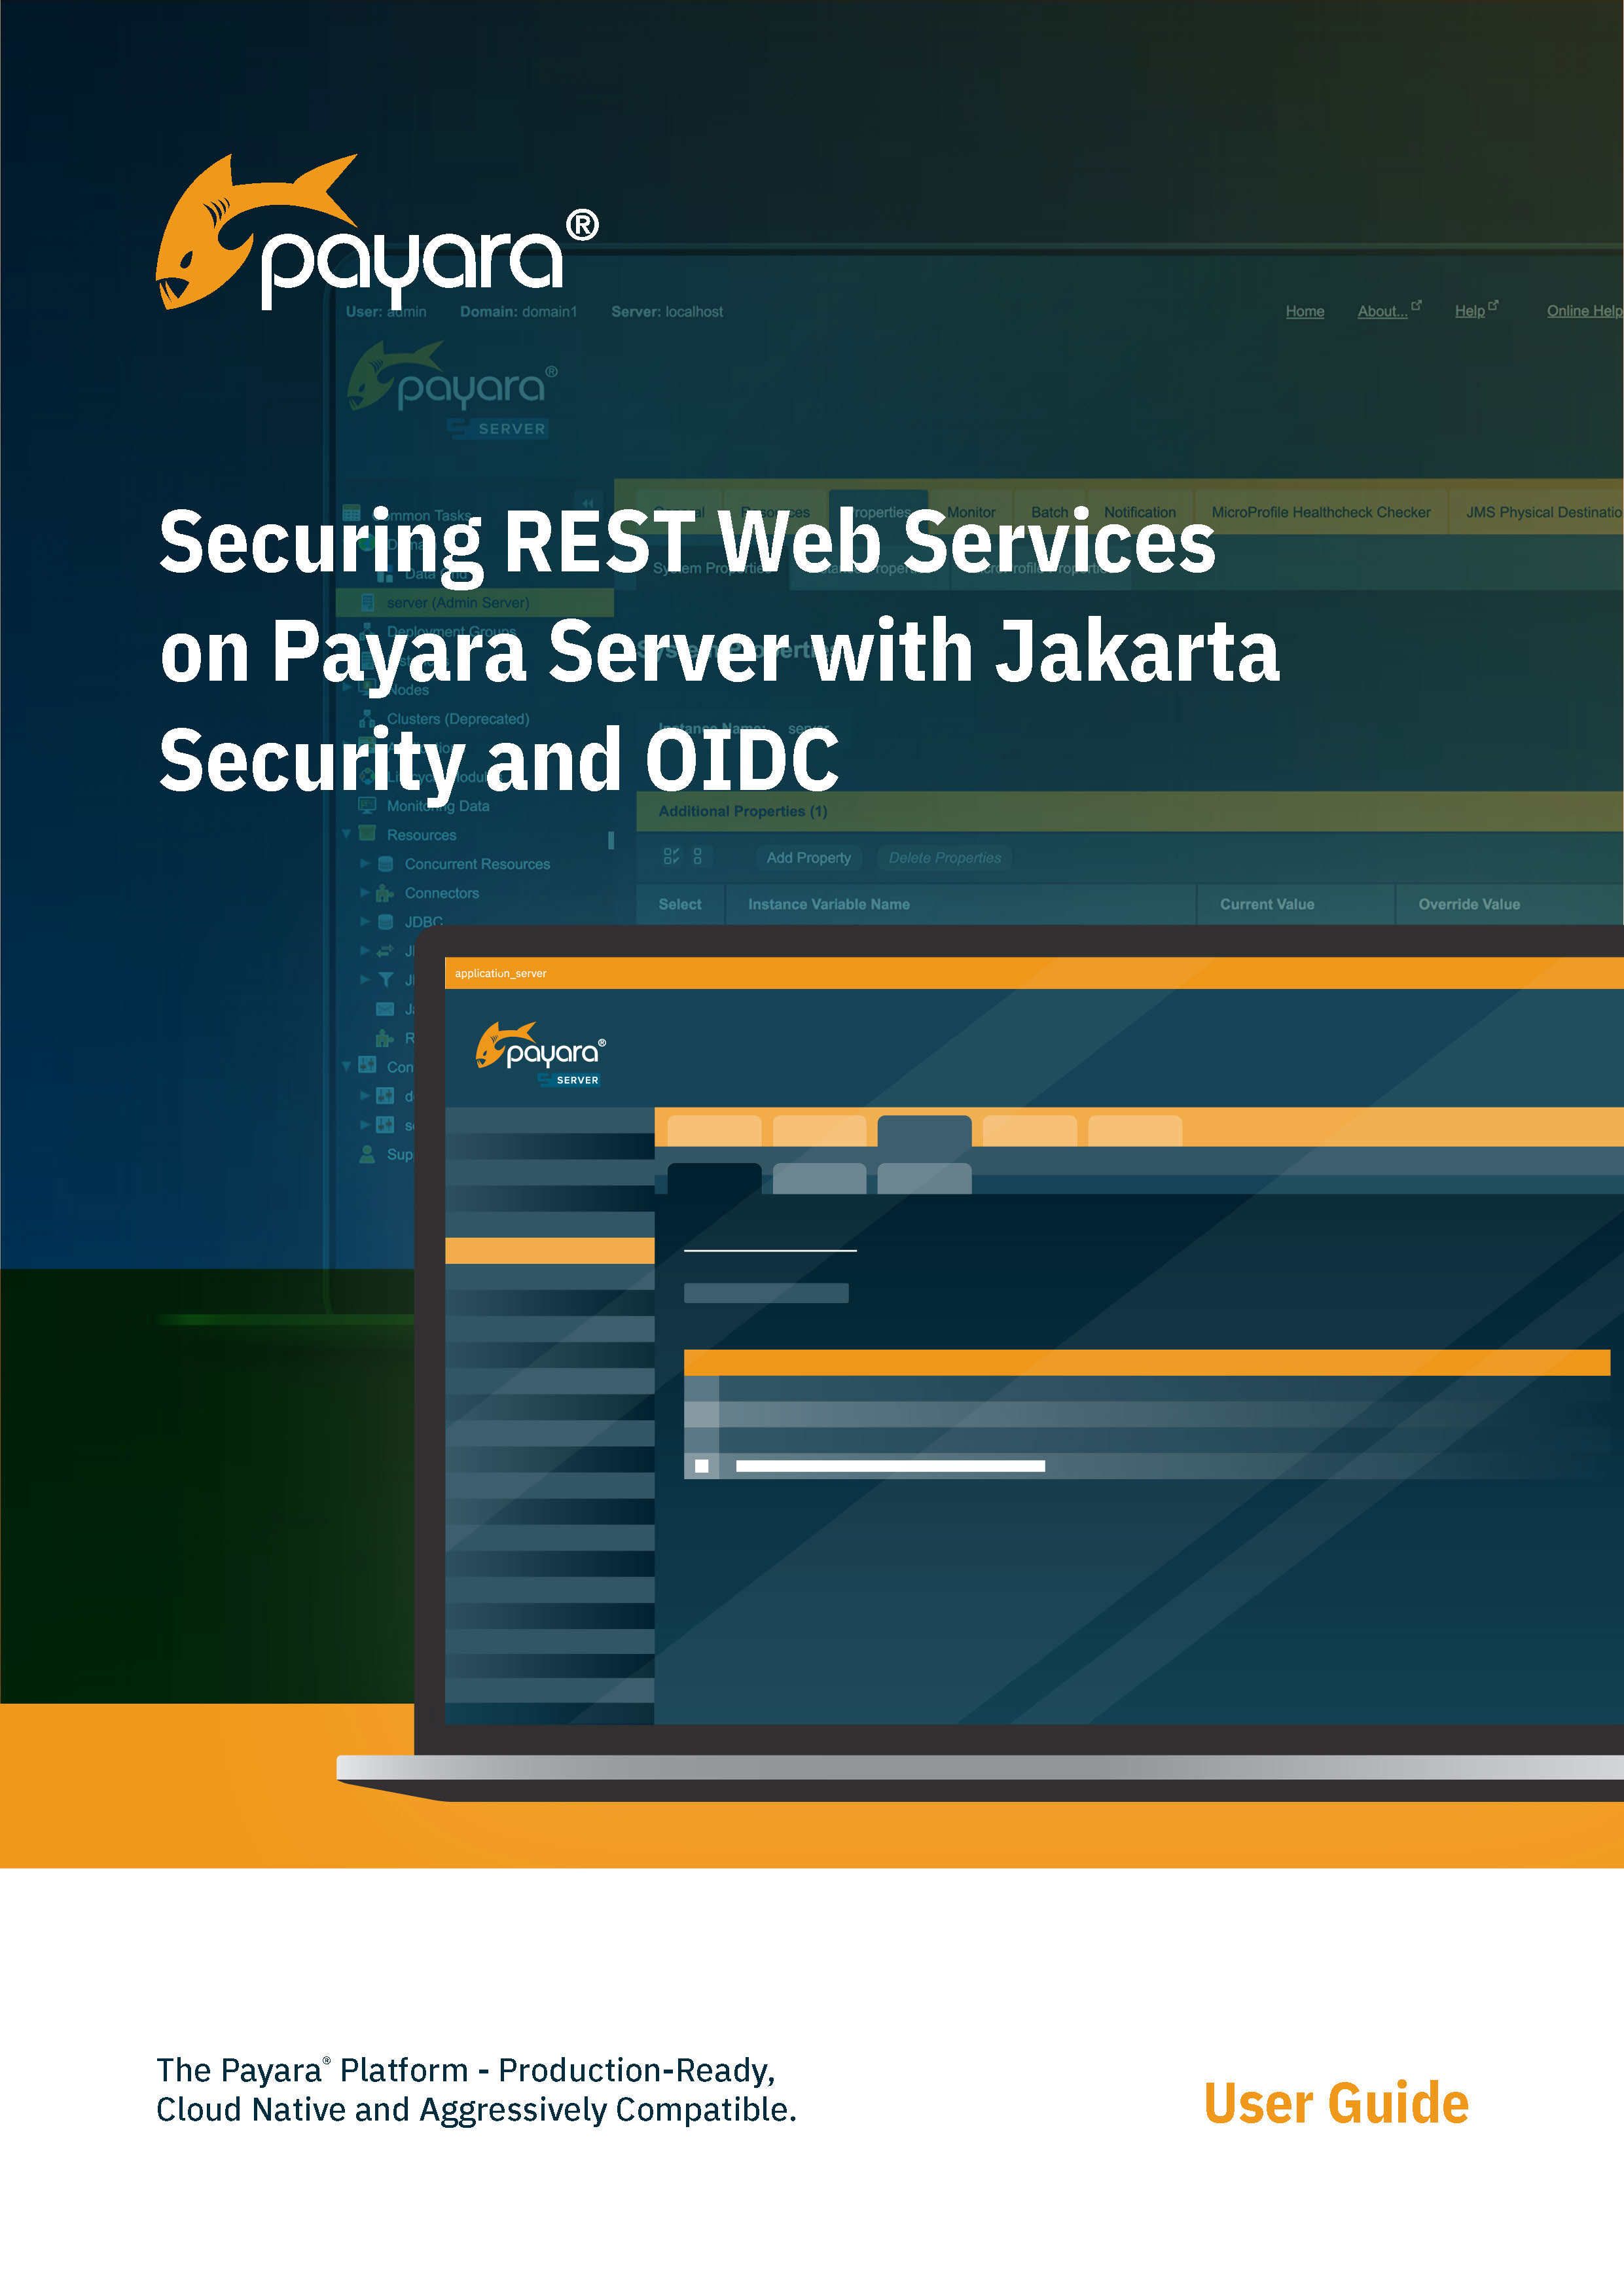 Securing REST Web Services on Payara Server cover page